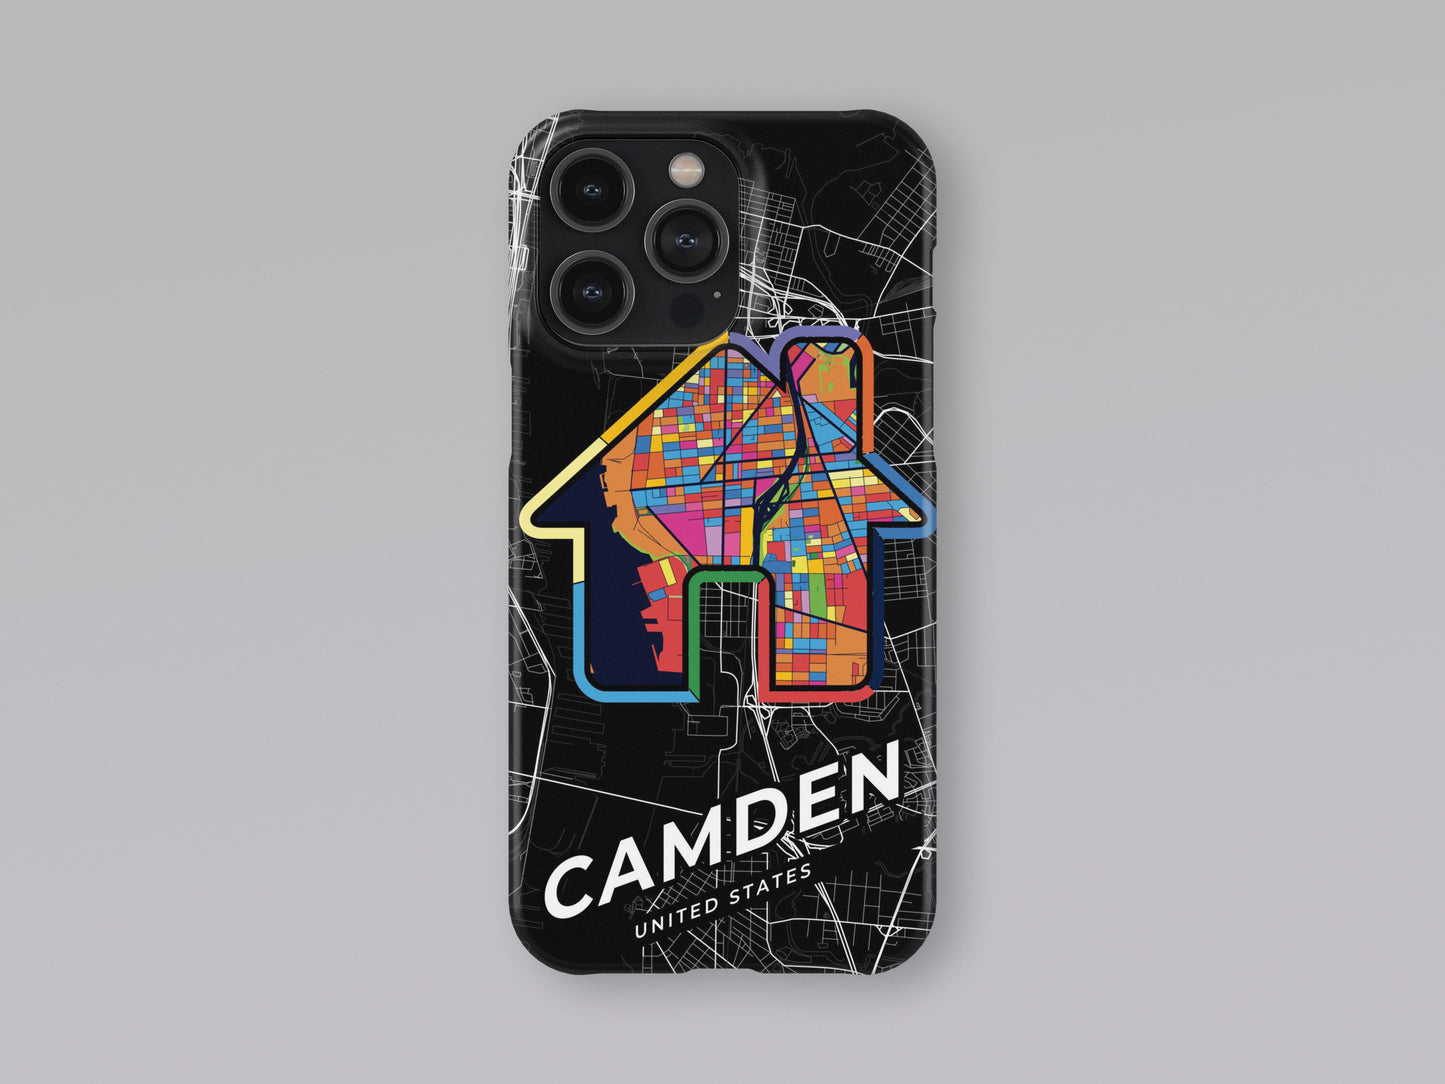 Camden New Jersey slim phone case with colorful icon. Birthday, wedding or housewarming gift. Couple match cases. 3